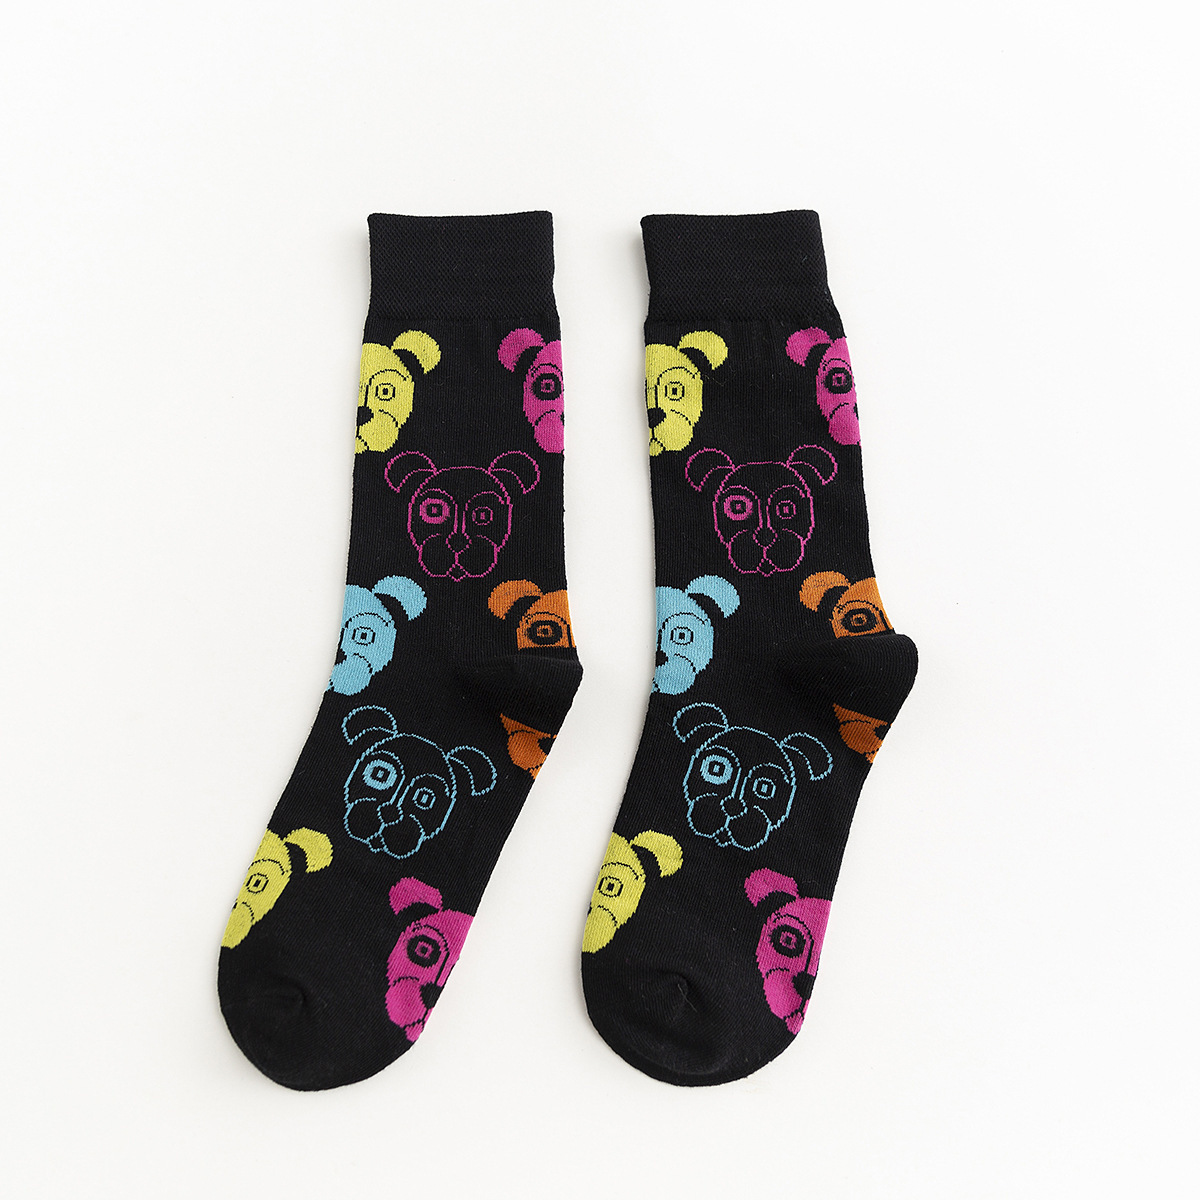 2019 Autumn And Winter New Socks Korean Fashion Personality Men And Women Tube Socks Cartoon Black And White Cat And Dog Animal Series